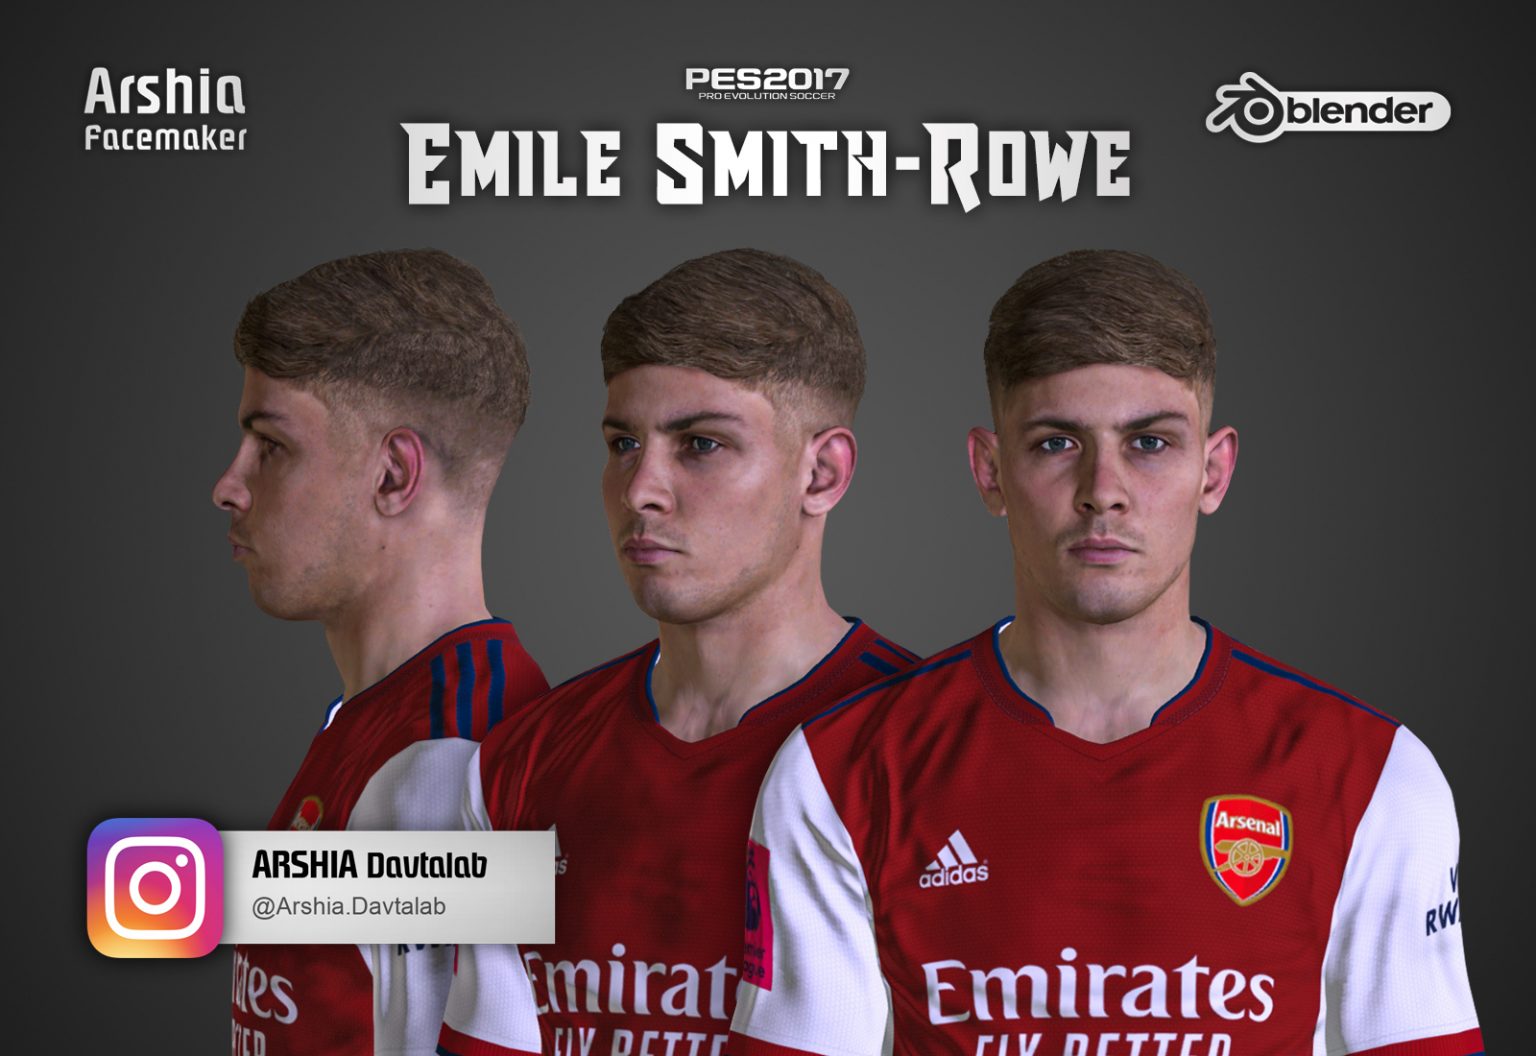 Arsenal fans cannot believe Emile Smith Rowes shocking new tattoo